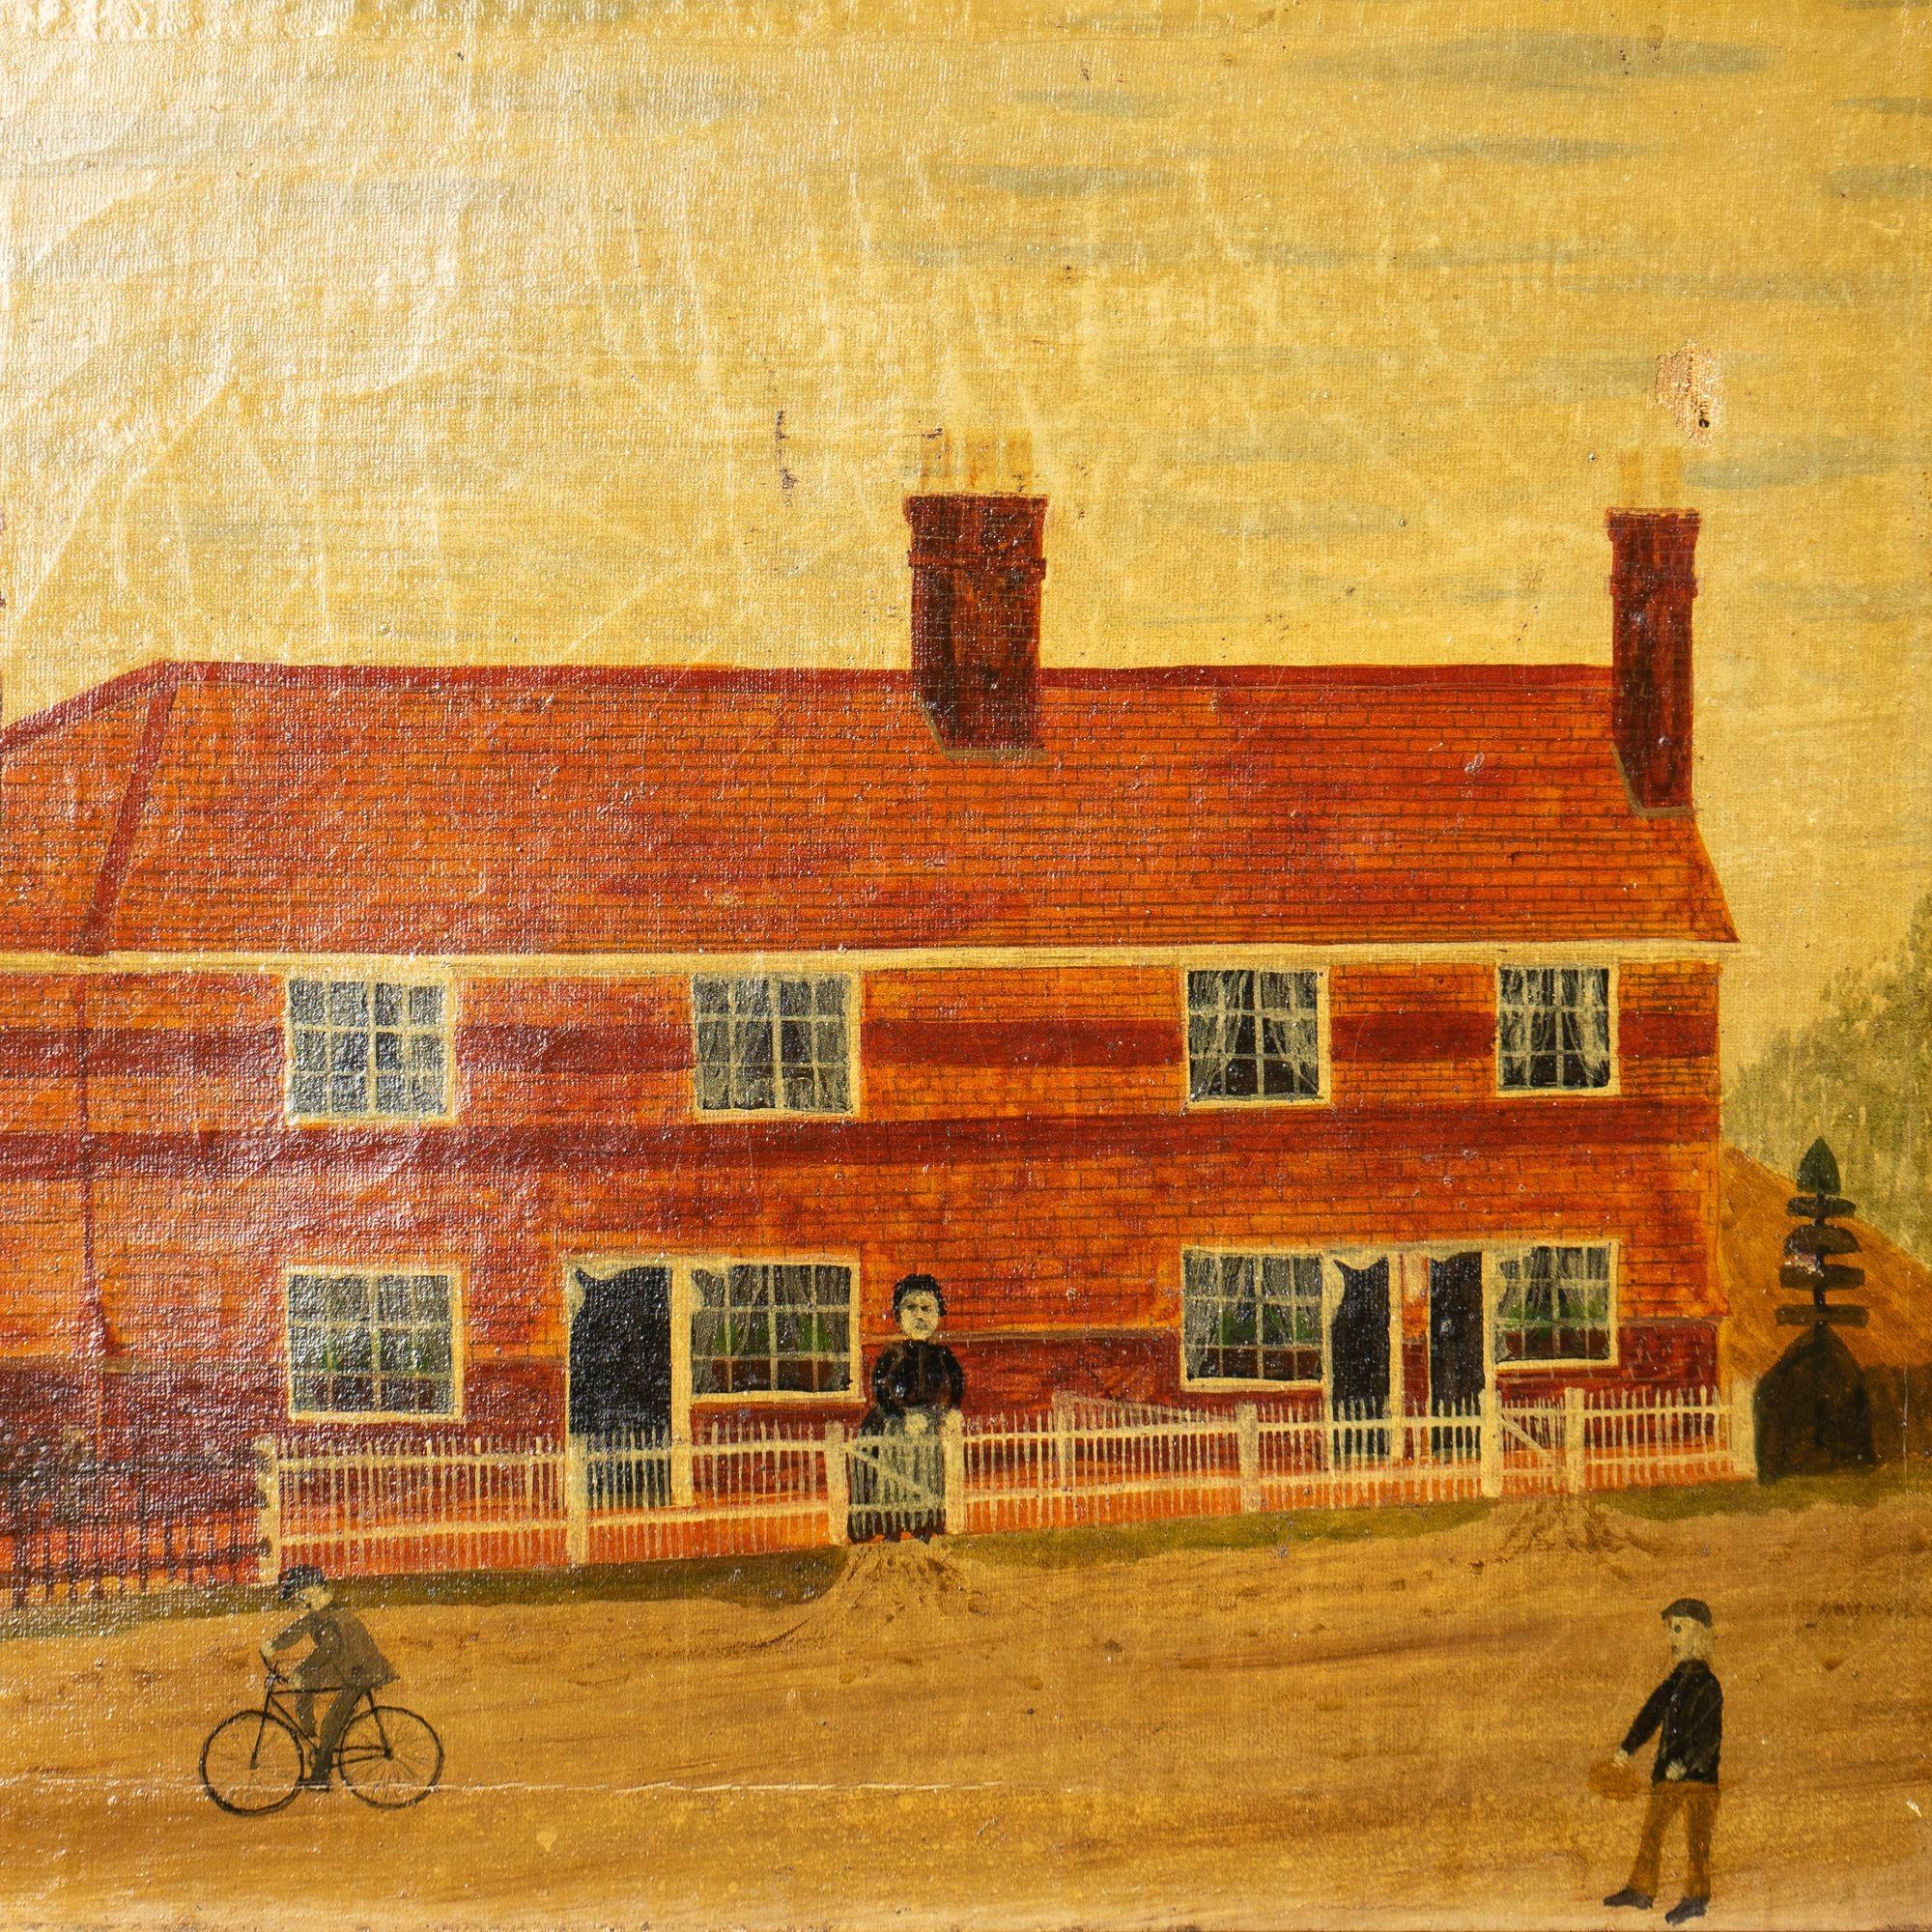 ANTIQUE ORIGINAL VICTORIAN FOLK ART PAINTING
Depicting a neat little row of brick-built workers' cottages in a rural setting with the most charming figures, a woman in a bonnet in her front garden and two men passing by in the street, one on foot